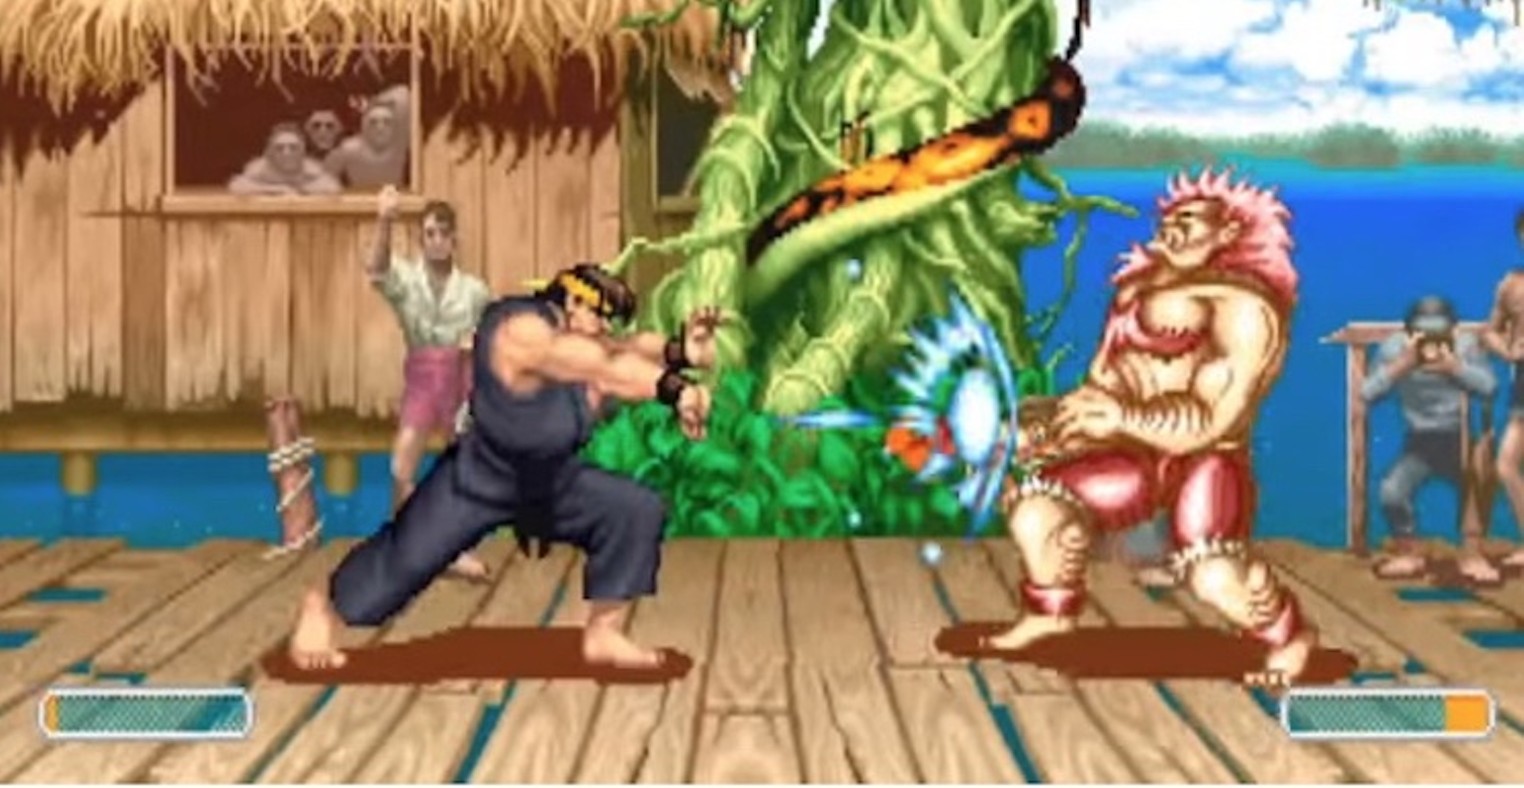 Street Fighter 2 is free on Steam to celebrate a new trove of